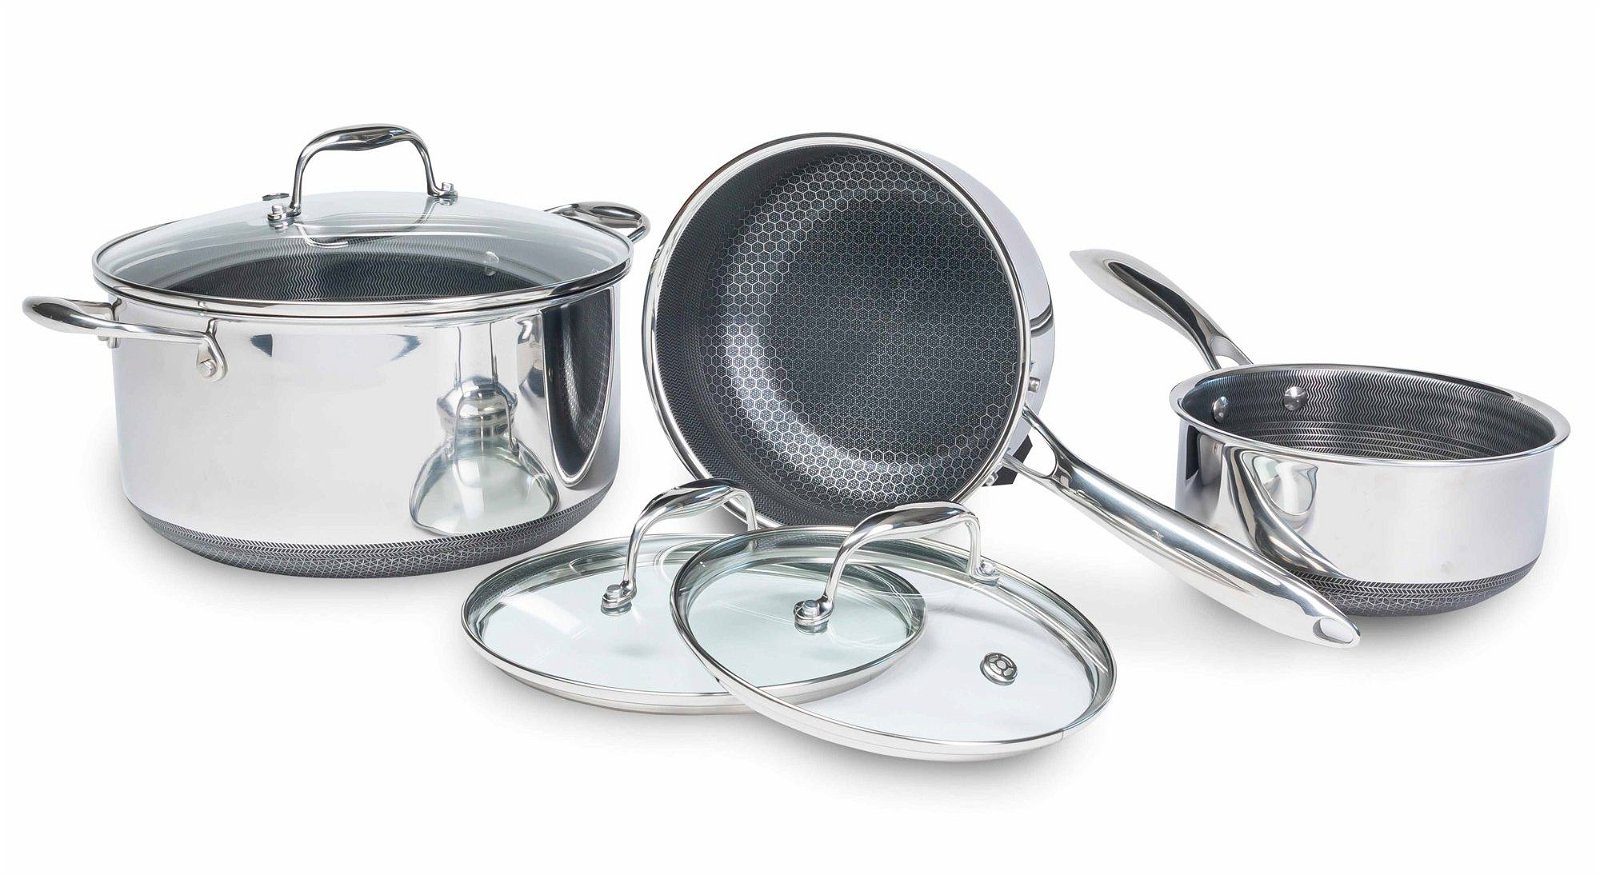 HexClad Hybrid 13 Piece Stainless Steel Cookware Set Indonesia